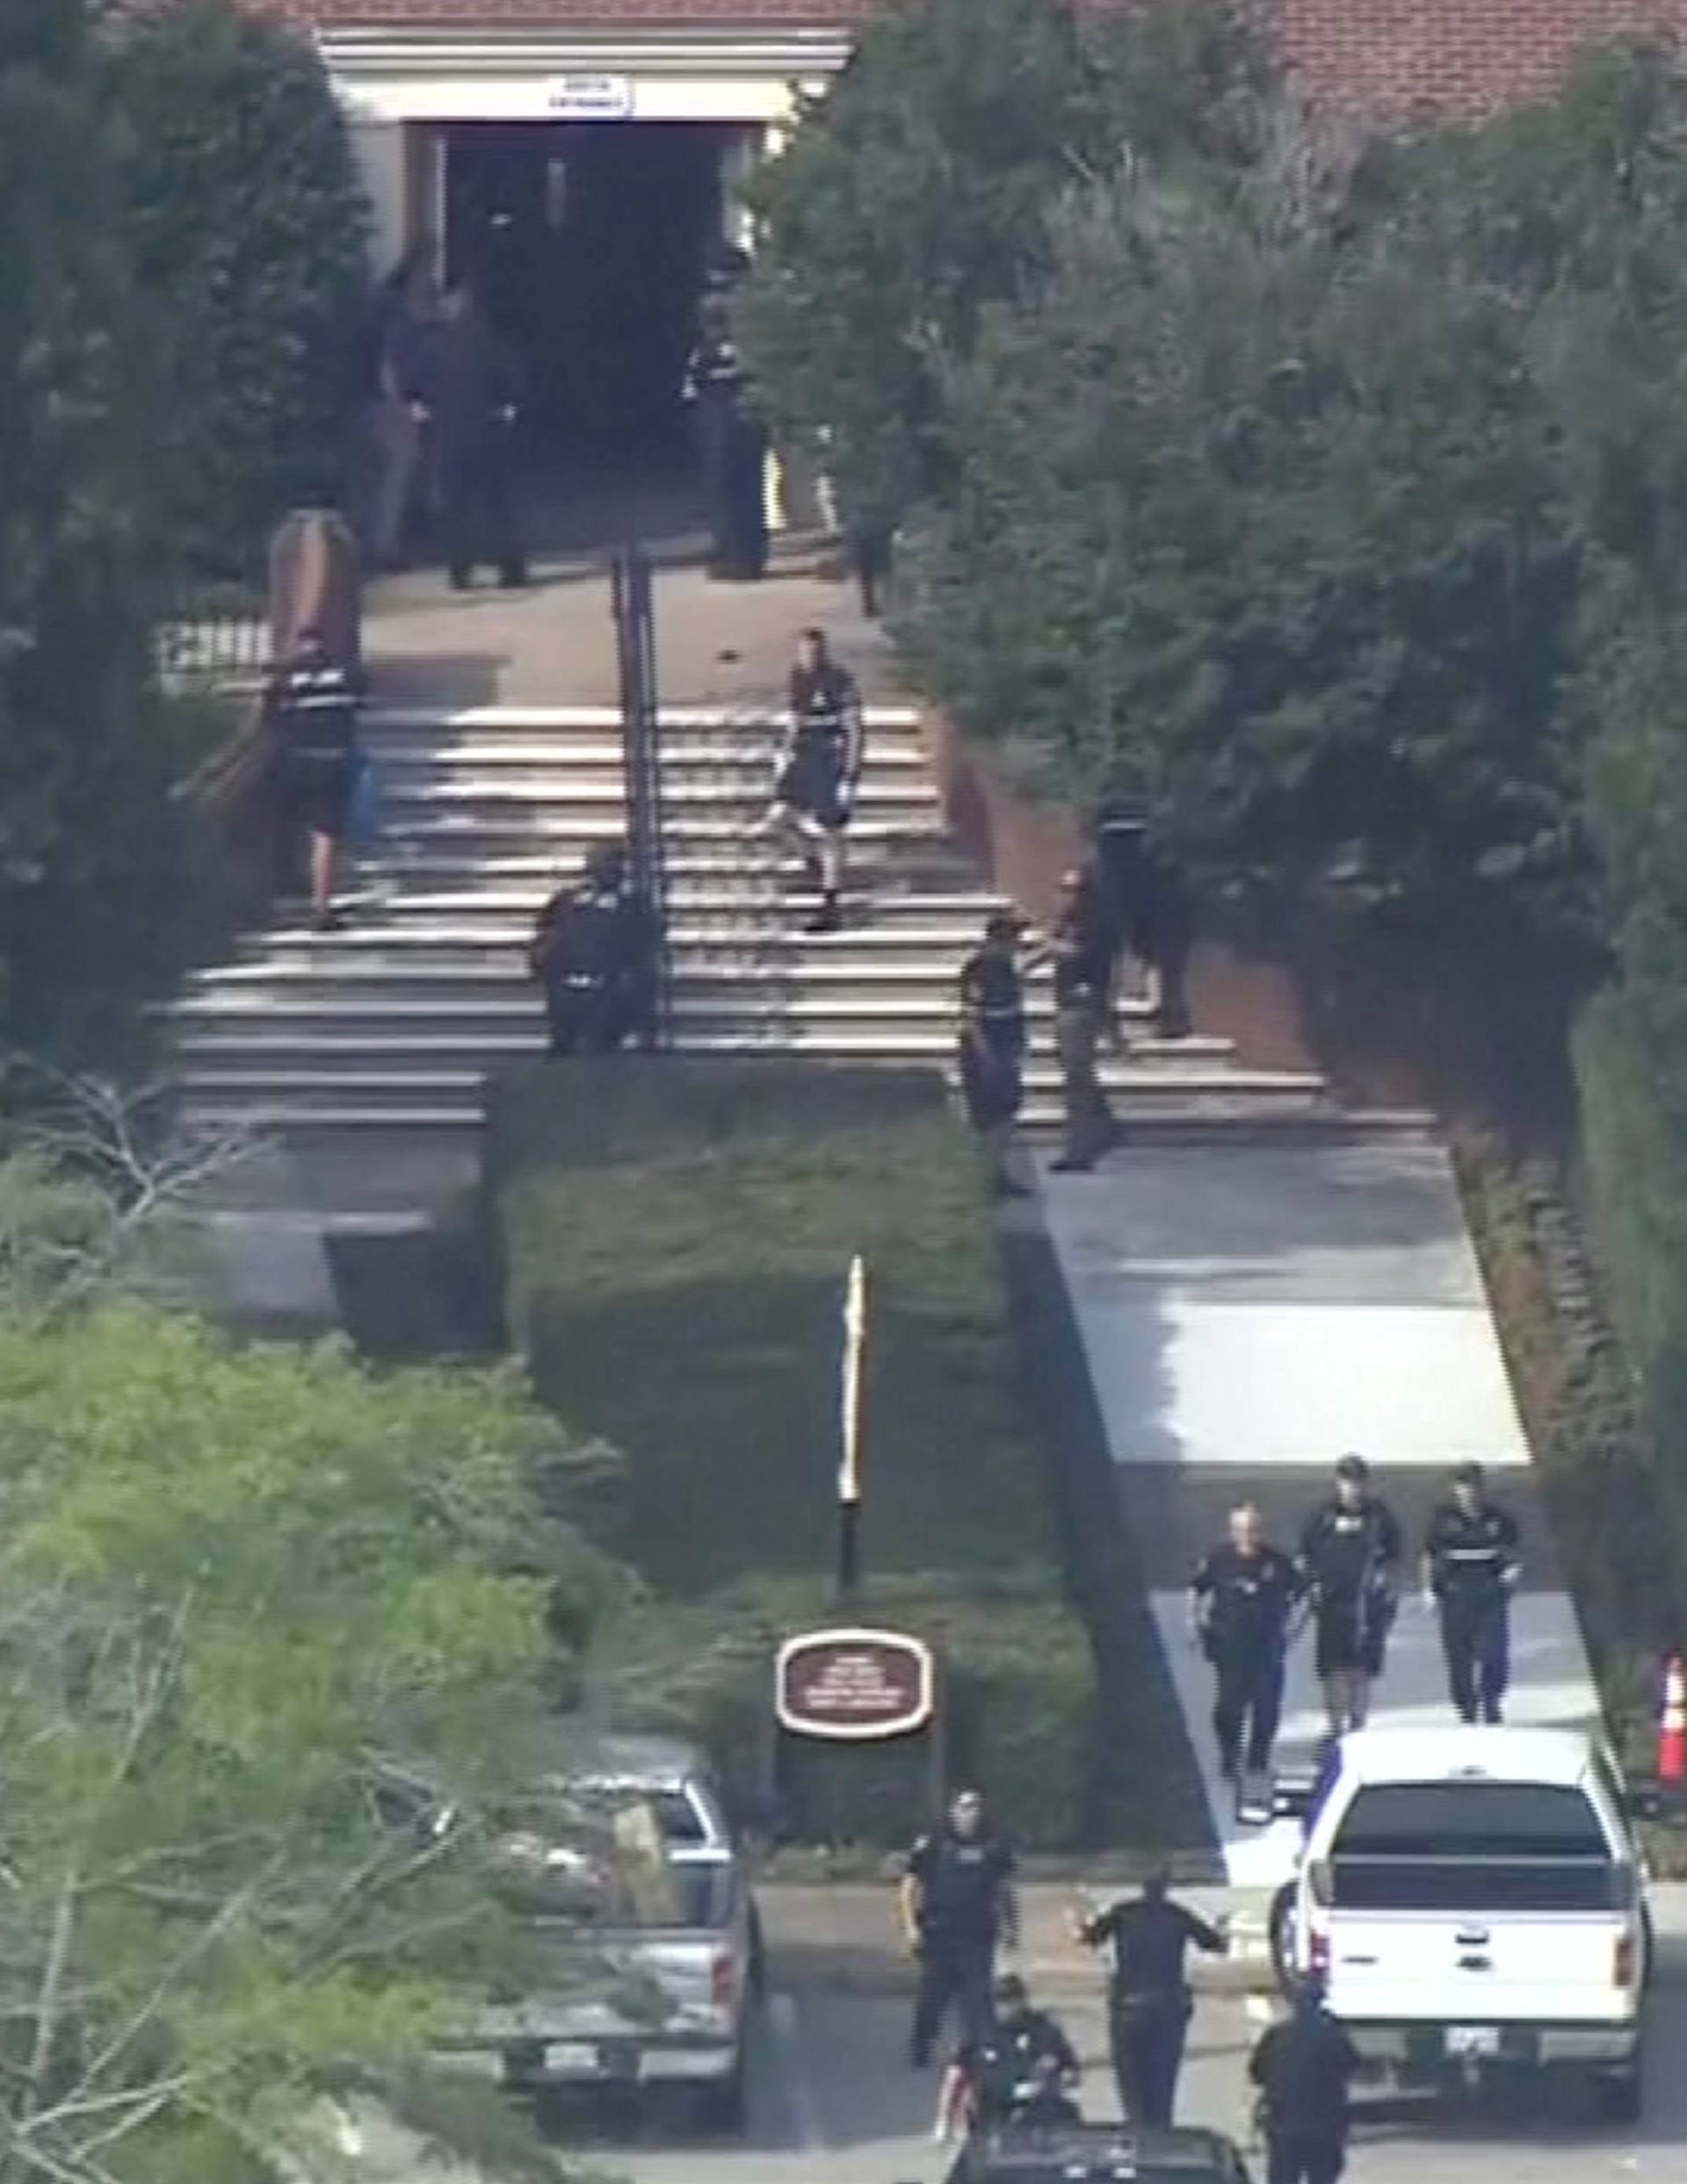 Police evacuate people from a building as a stretcher stands by in this still image taken from video following a shooting incident at the municipal center in Virginia Beach